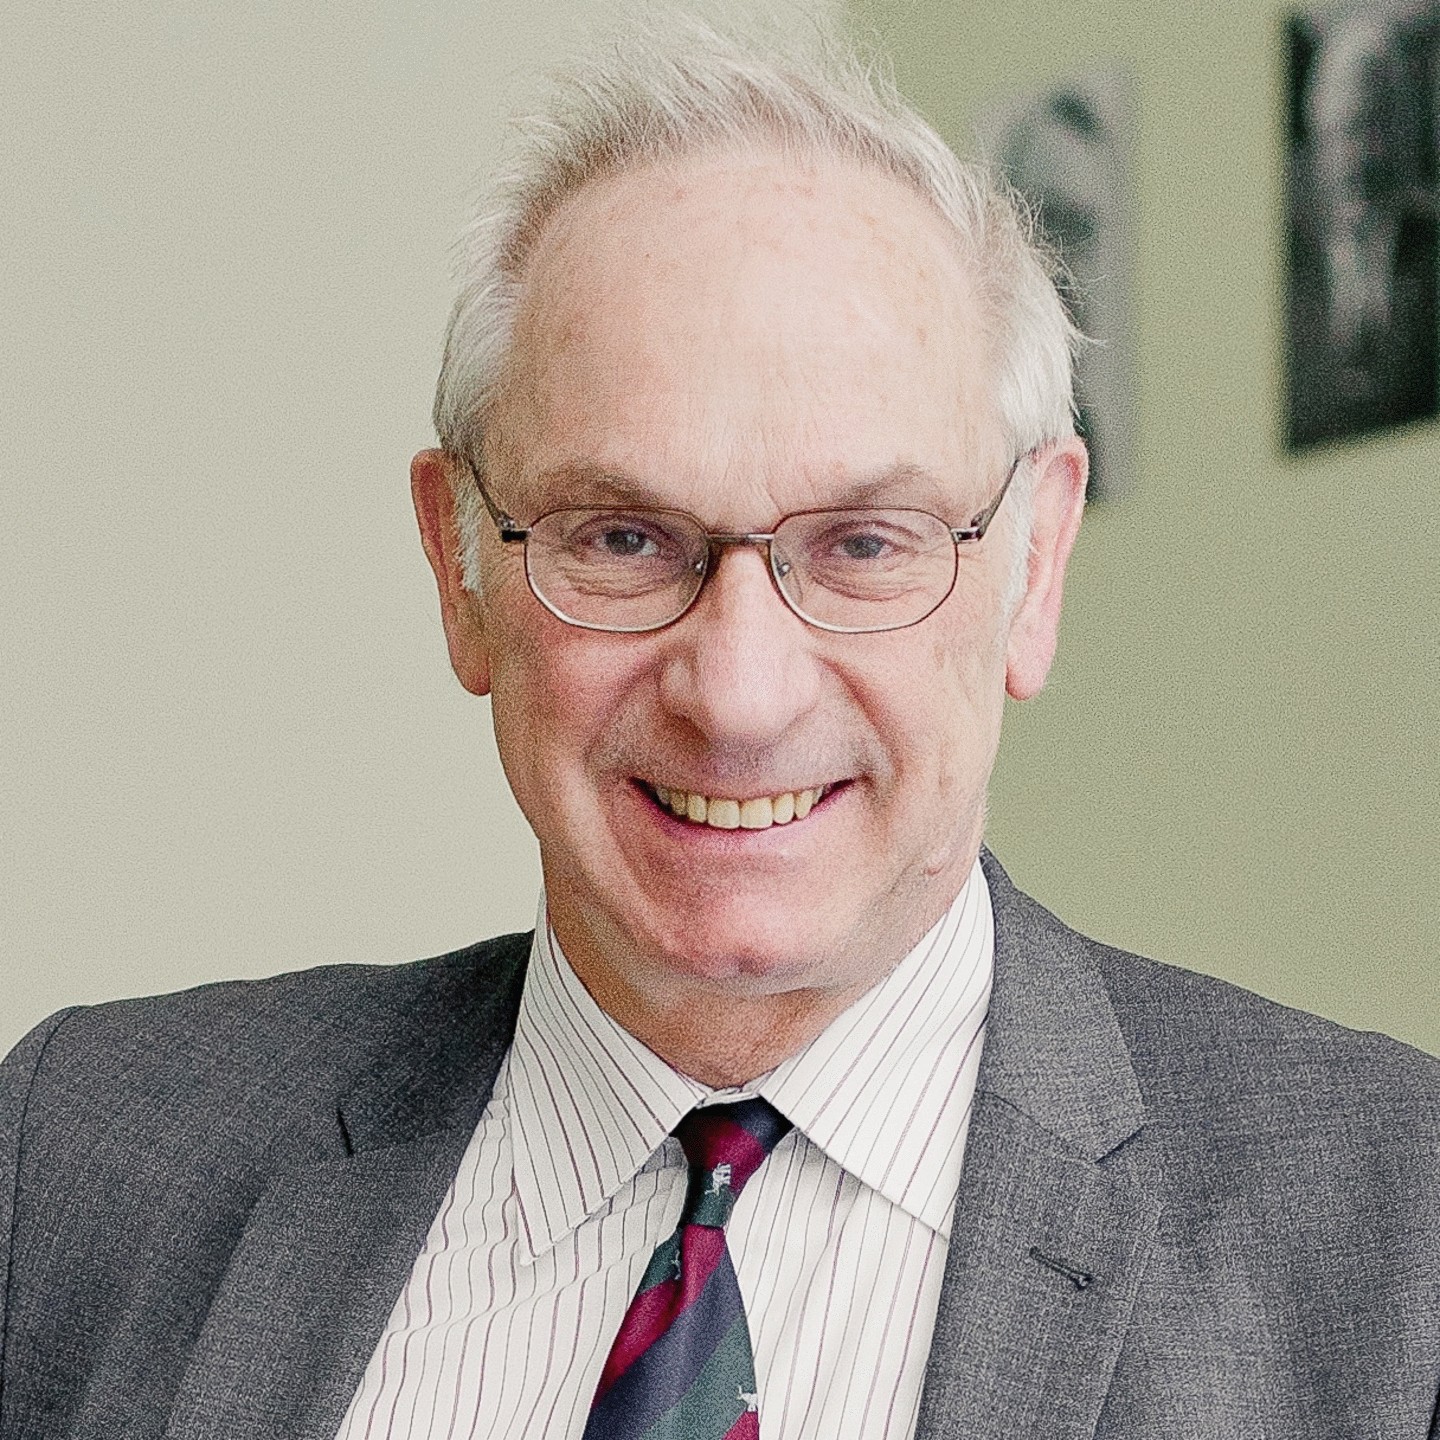 Prof. Dr. Wolfgang Wessels - Network Coordinator